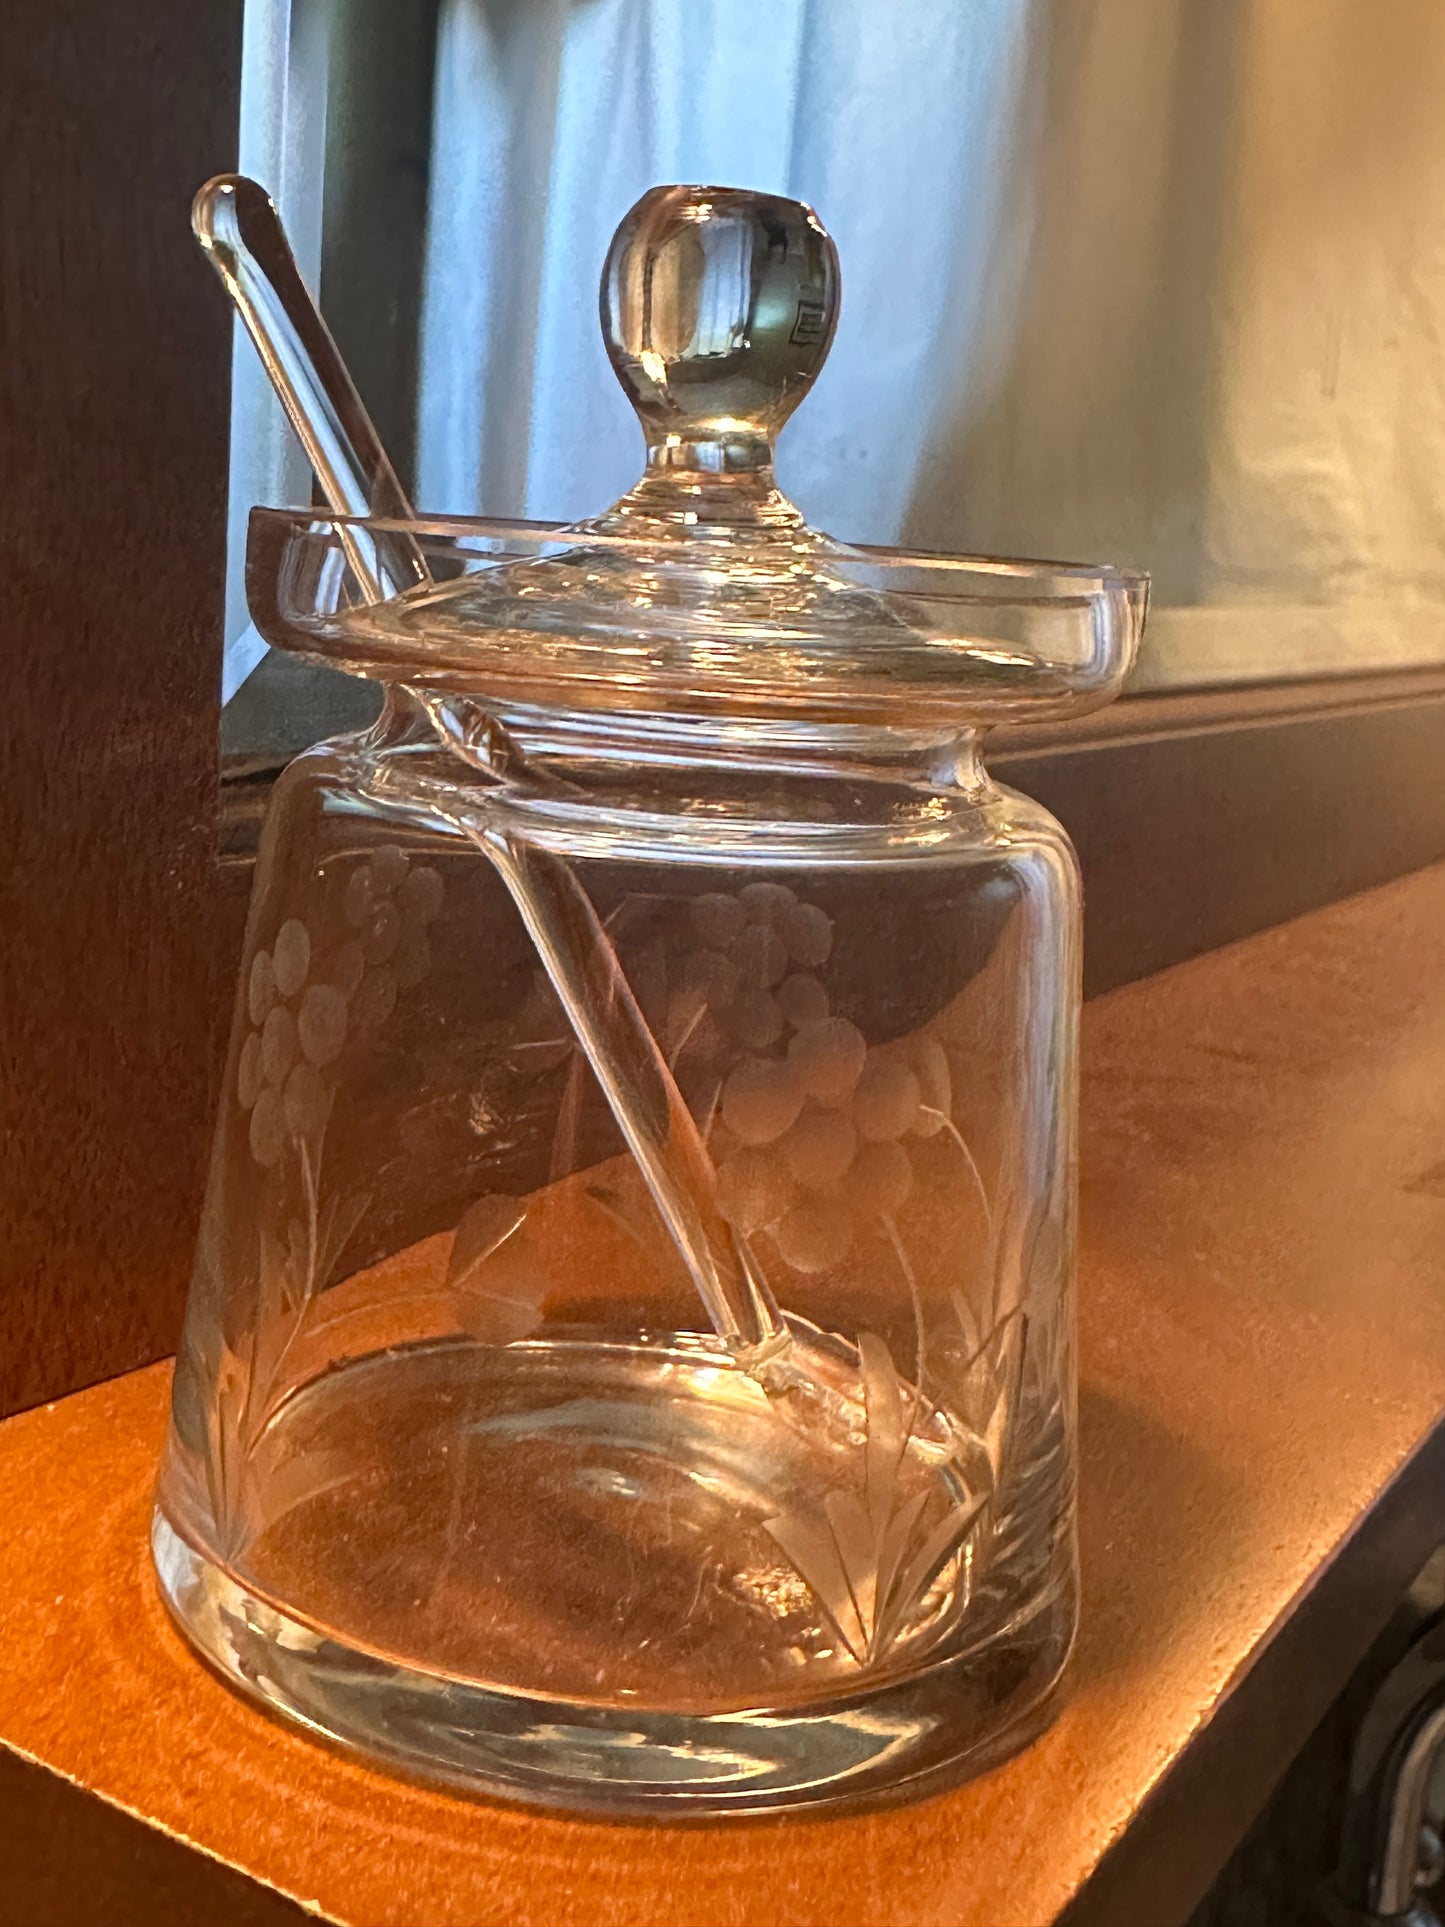 Etched Vintage Daisy Relish Jar with glass spoon and lid